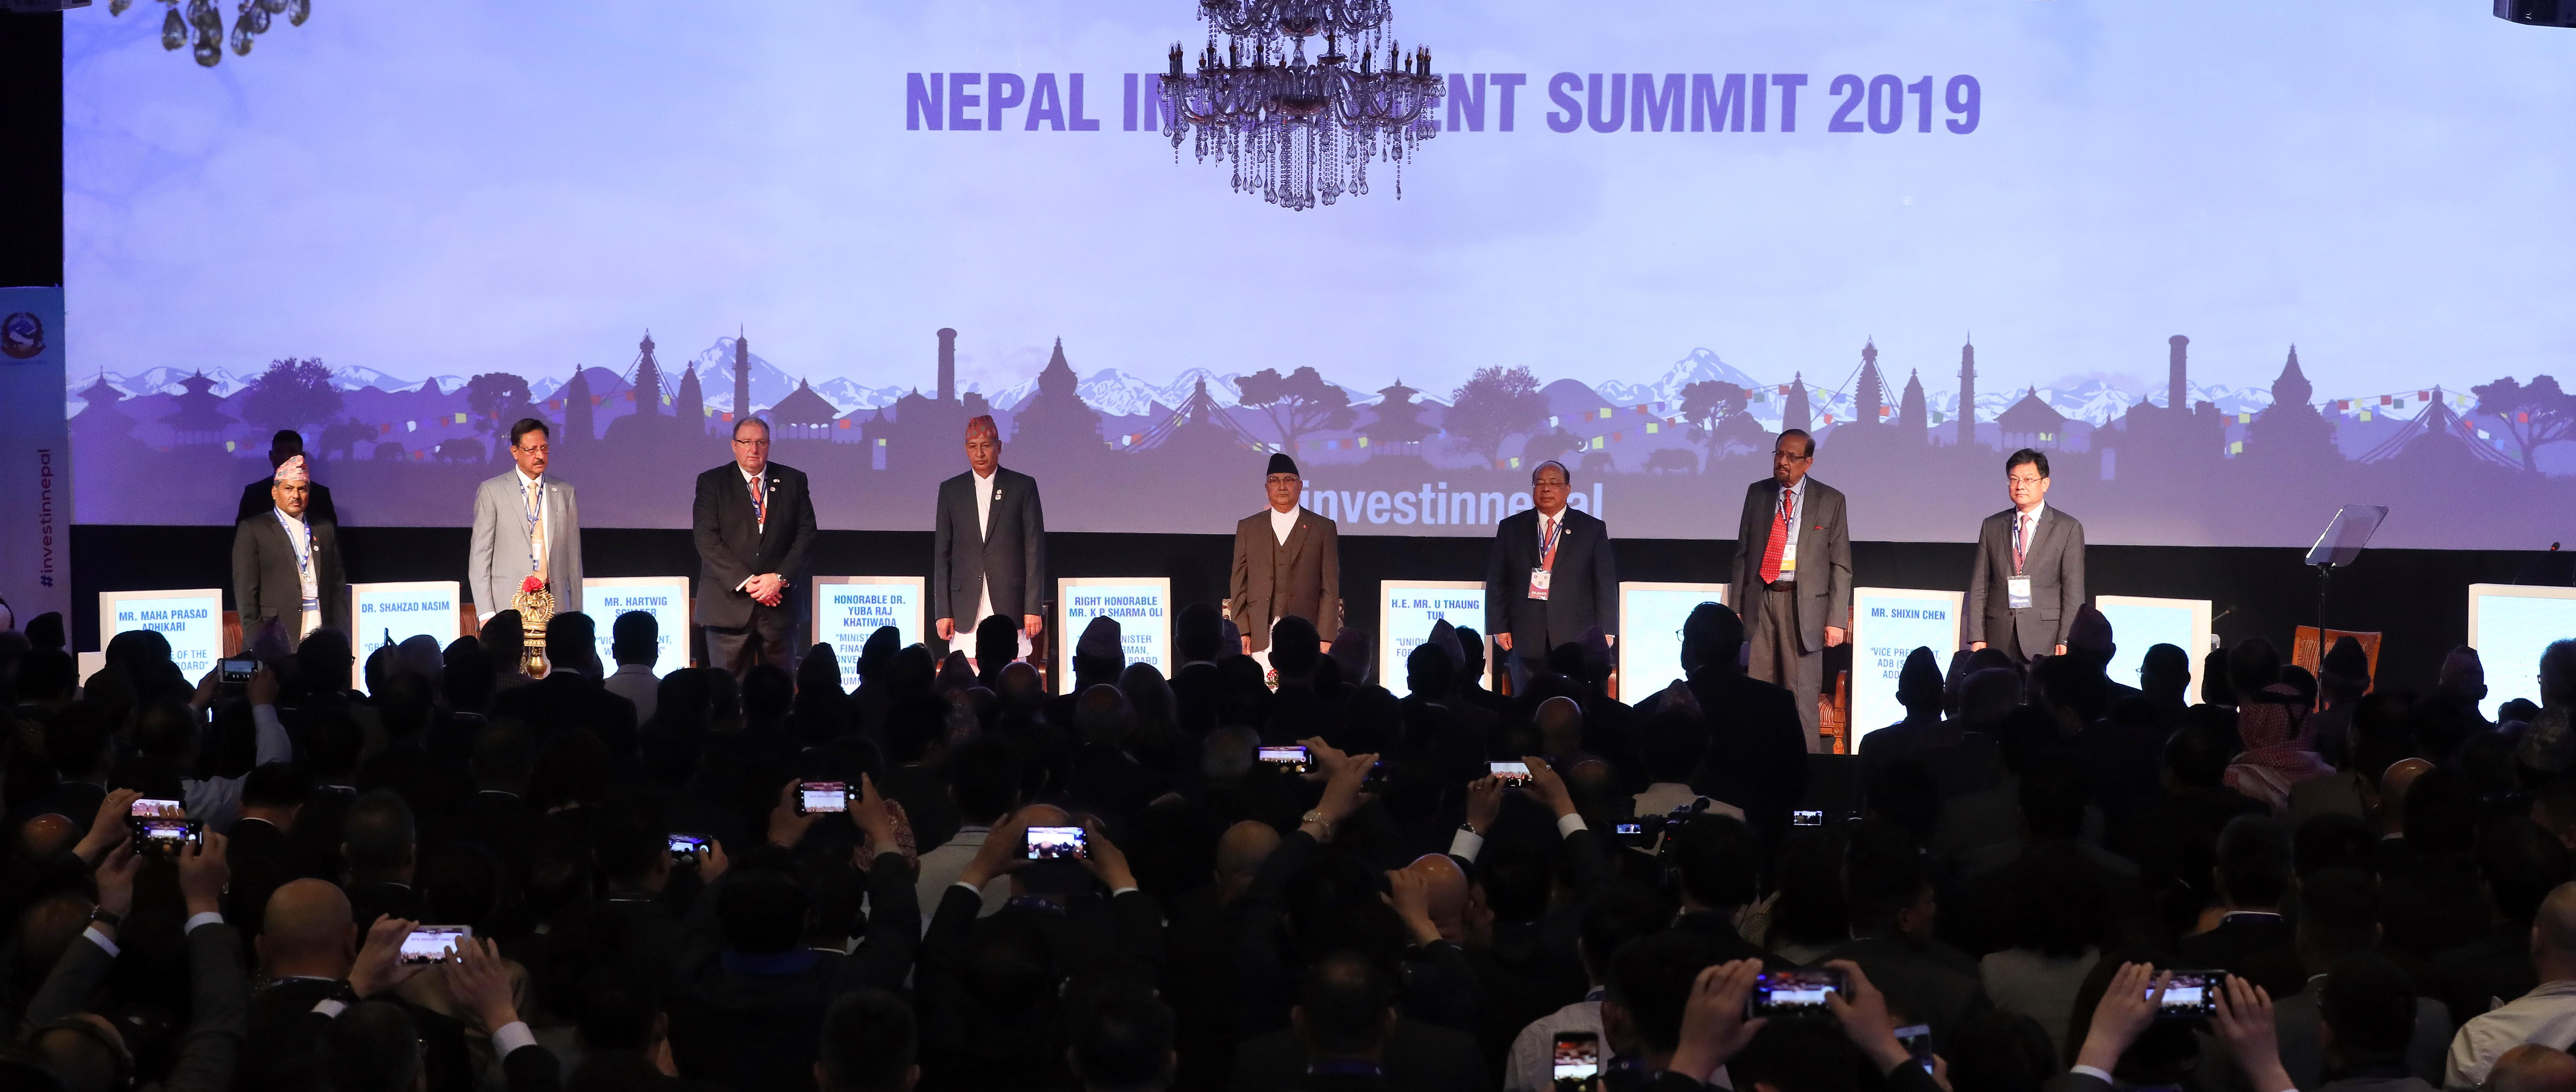 At the Investment Summit, government showcases the country’s mega